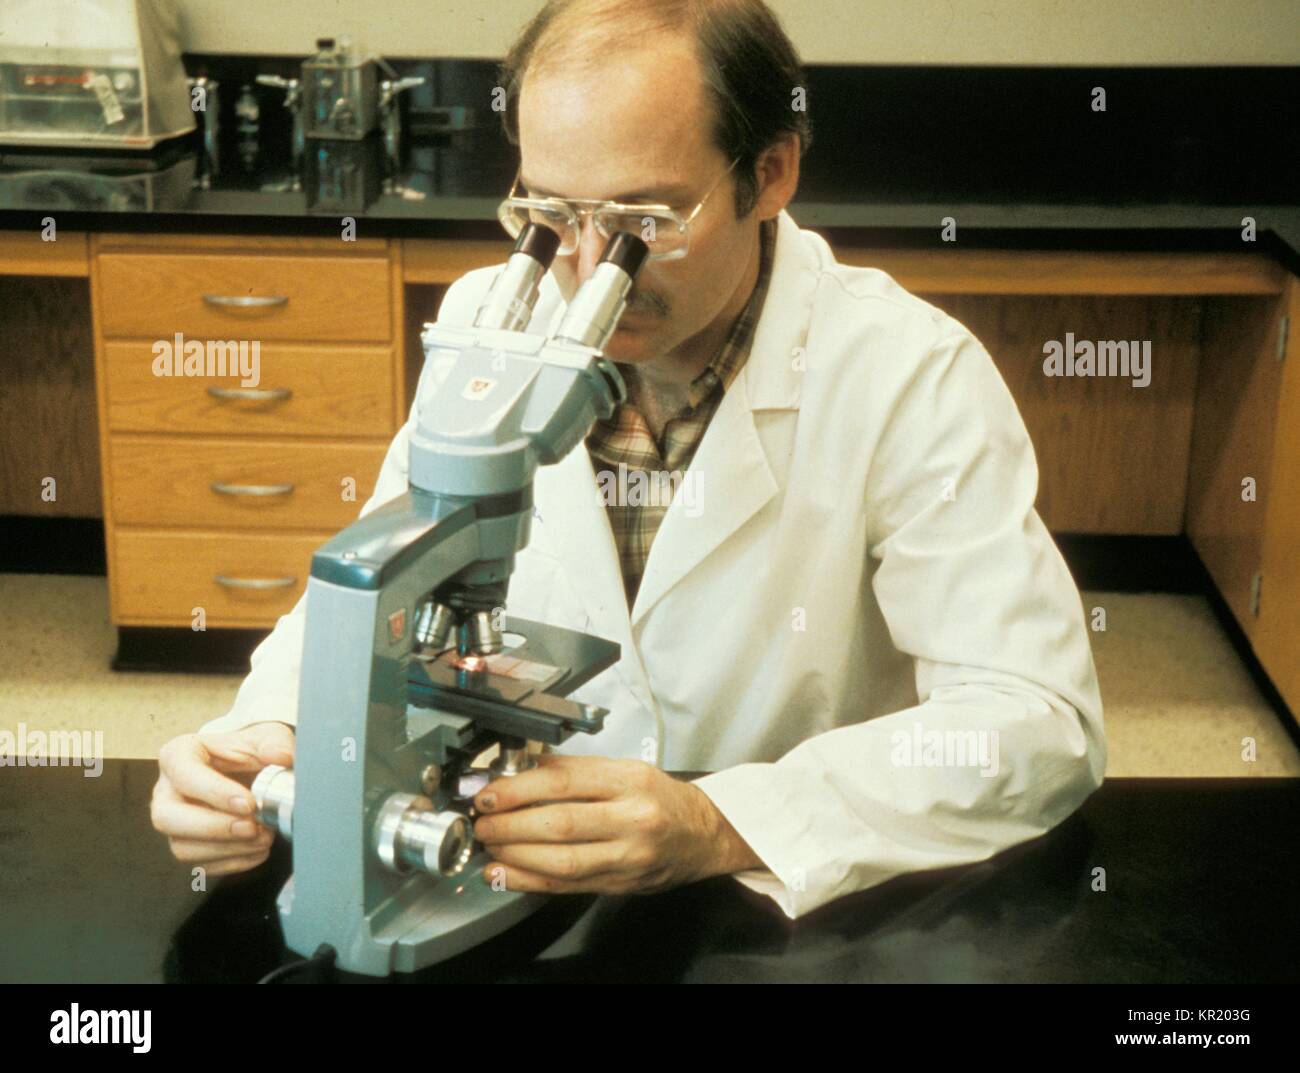 This was Joseph E. McDade, Ph.D. CDC epidemiologist using a transmission light microscope during a scientific investigation, 1977. Dr. McDade isolated and identified the bacterium that caused the outbreak of Legionnaires' disease, an acute and sometimes fatal respiratory illness caused by the Legionella pneumophila bacterium. Image courtesy CDC. Stock Photo